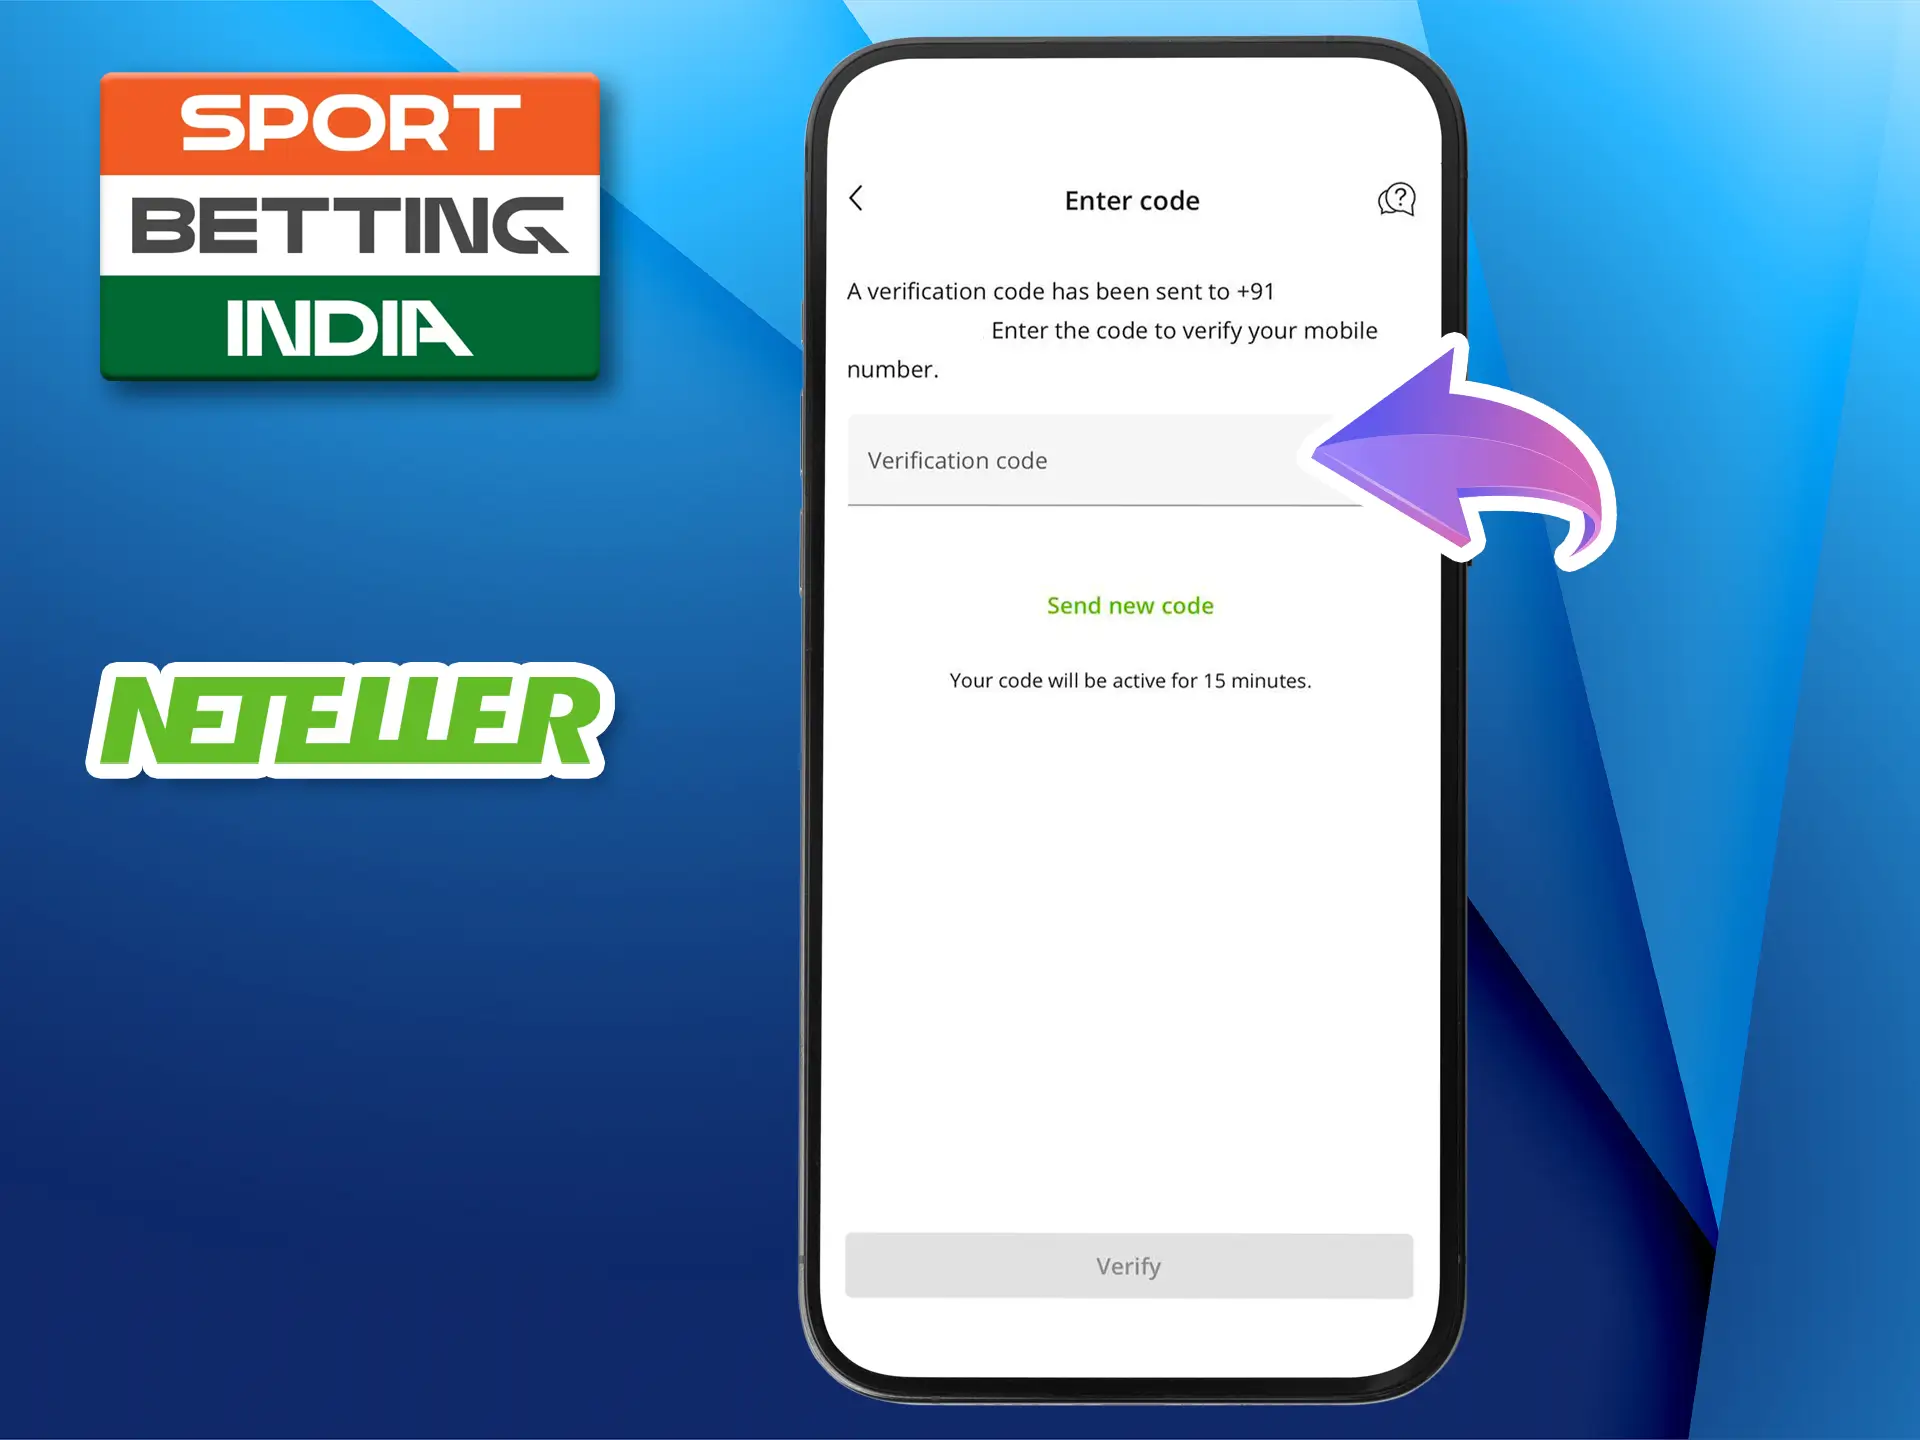 Use the code from the SMS to verify your phone number in the Neteller app.